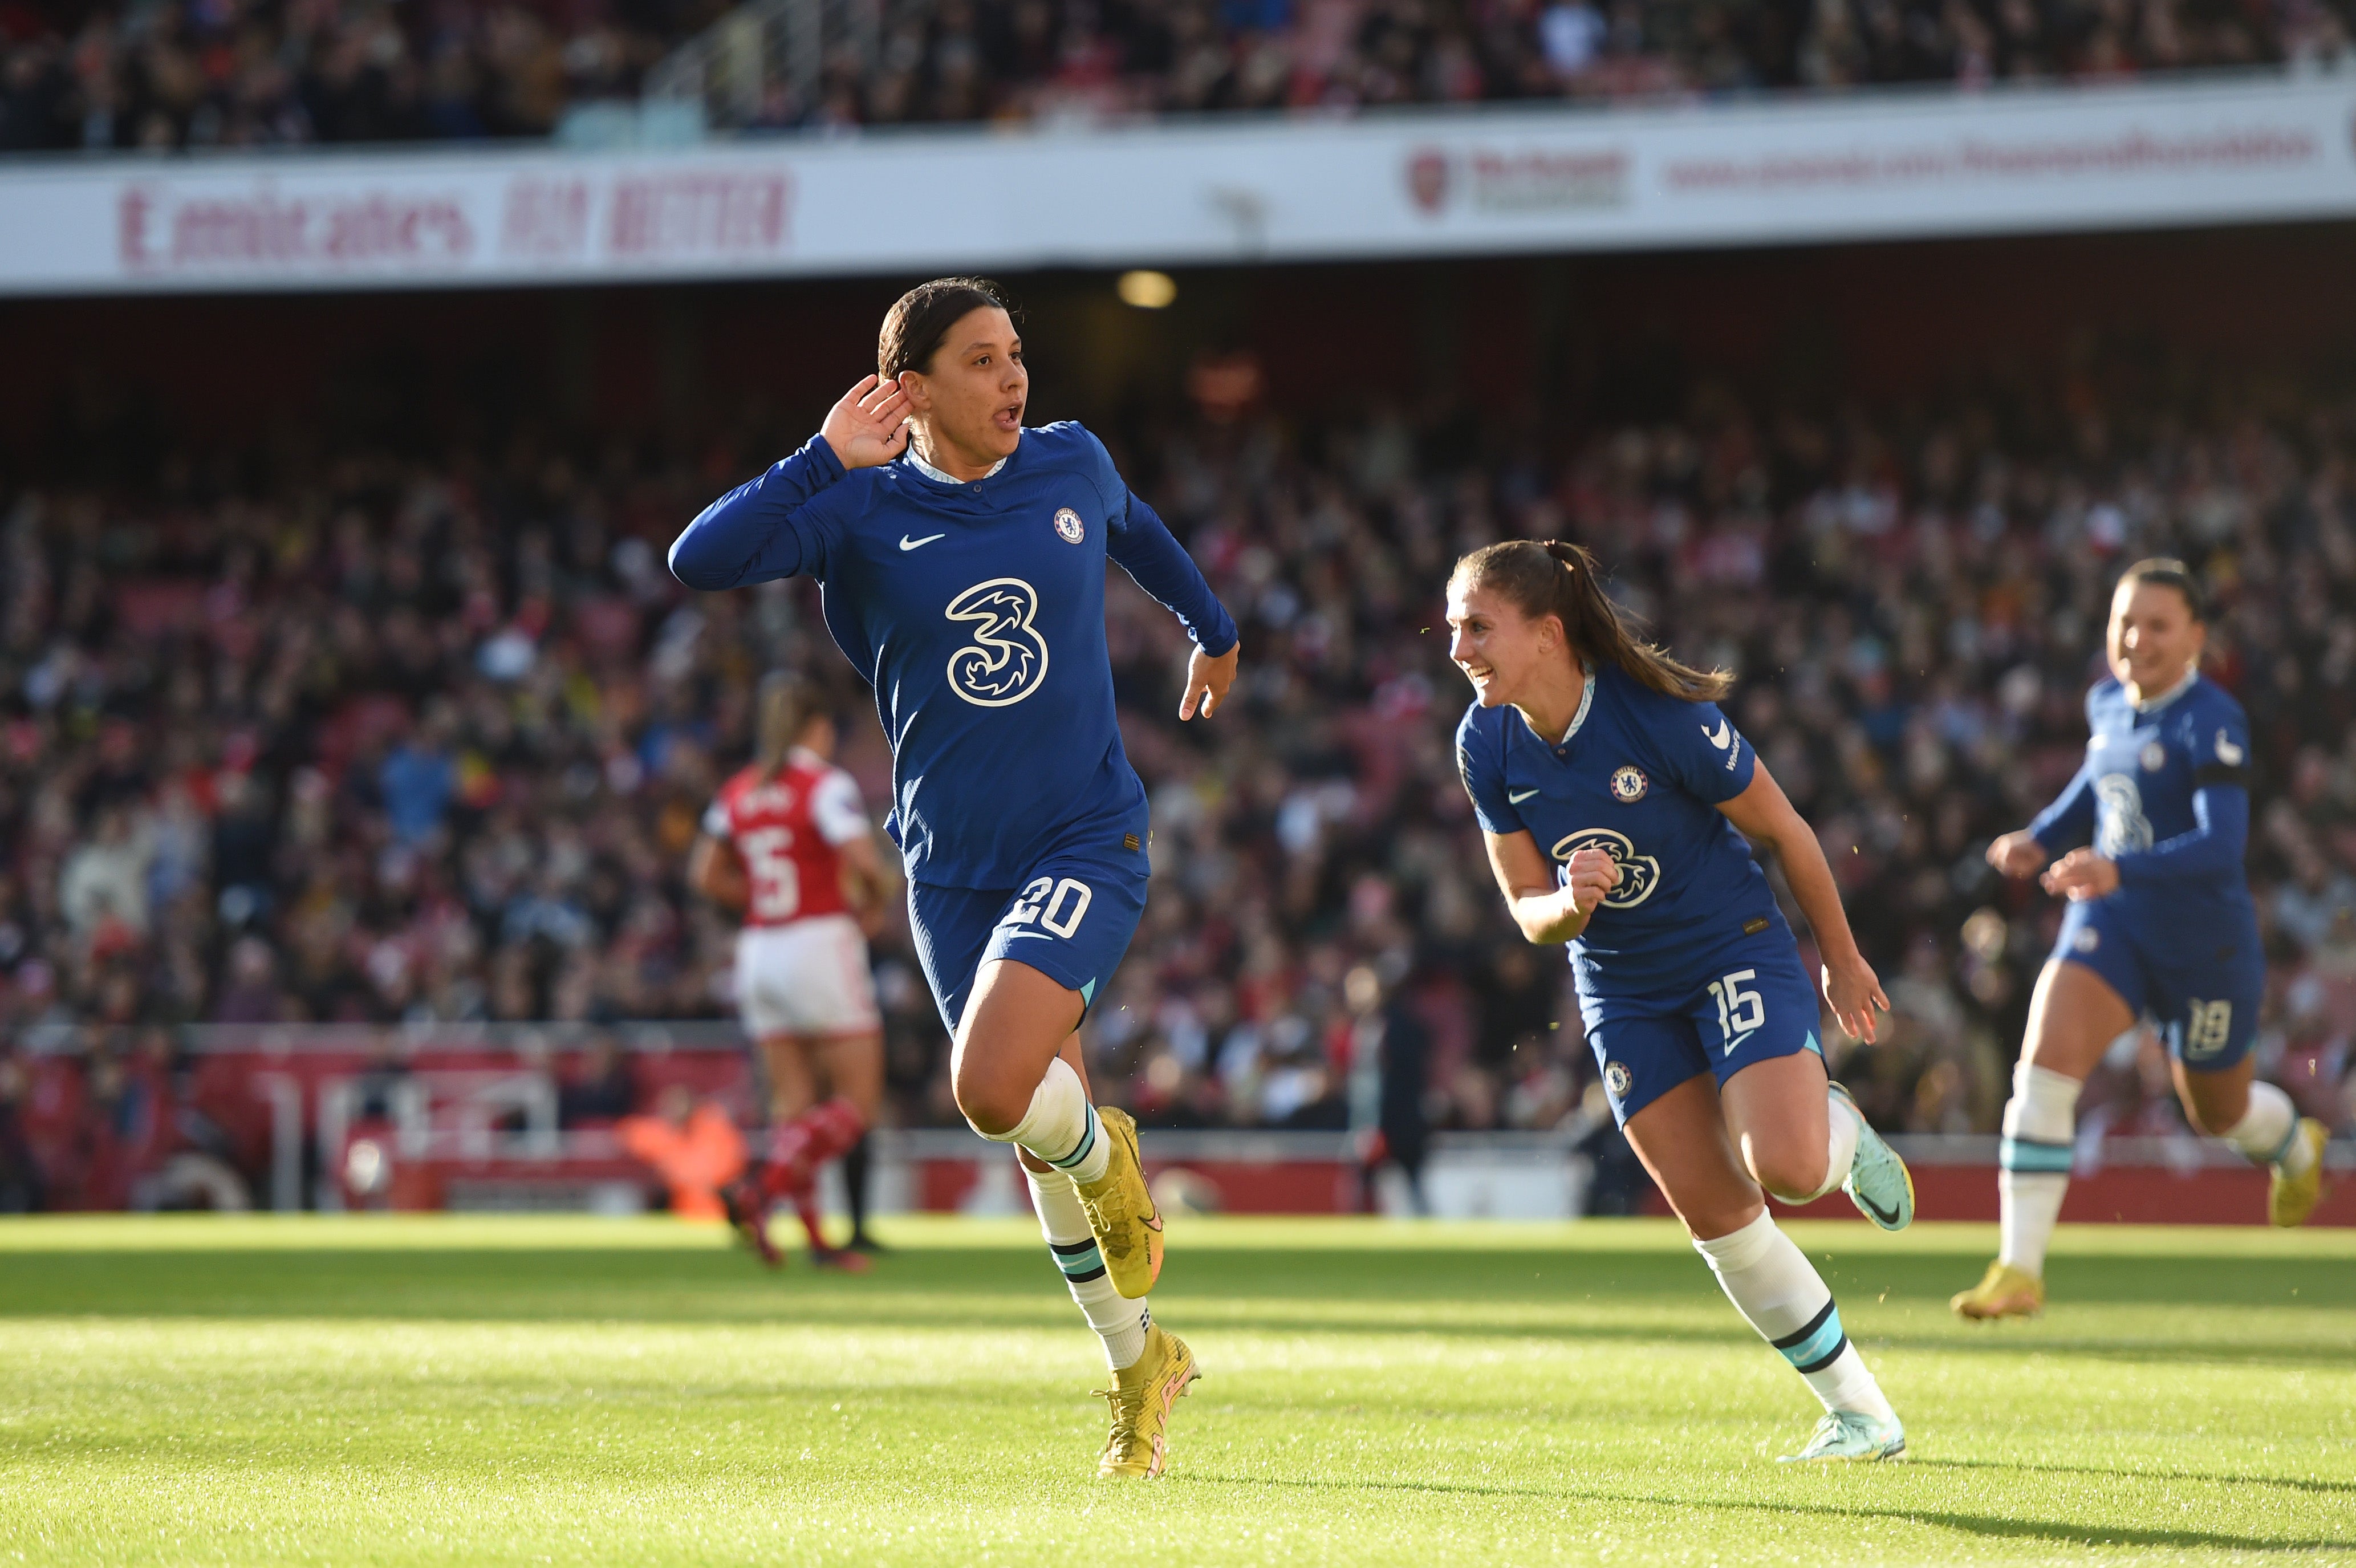 Chelsea Women back in action in first game of Arsenal double